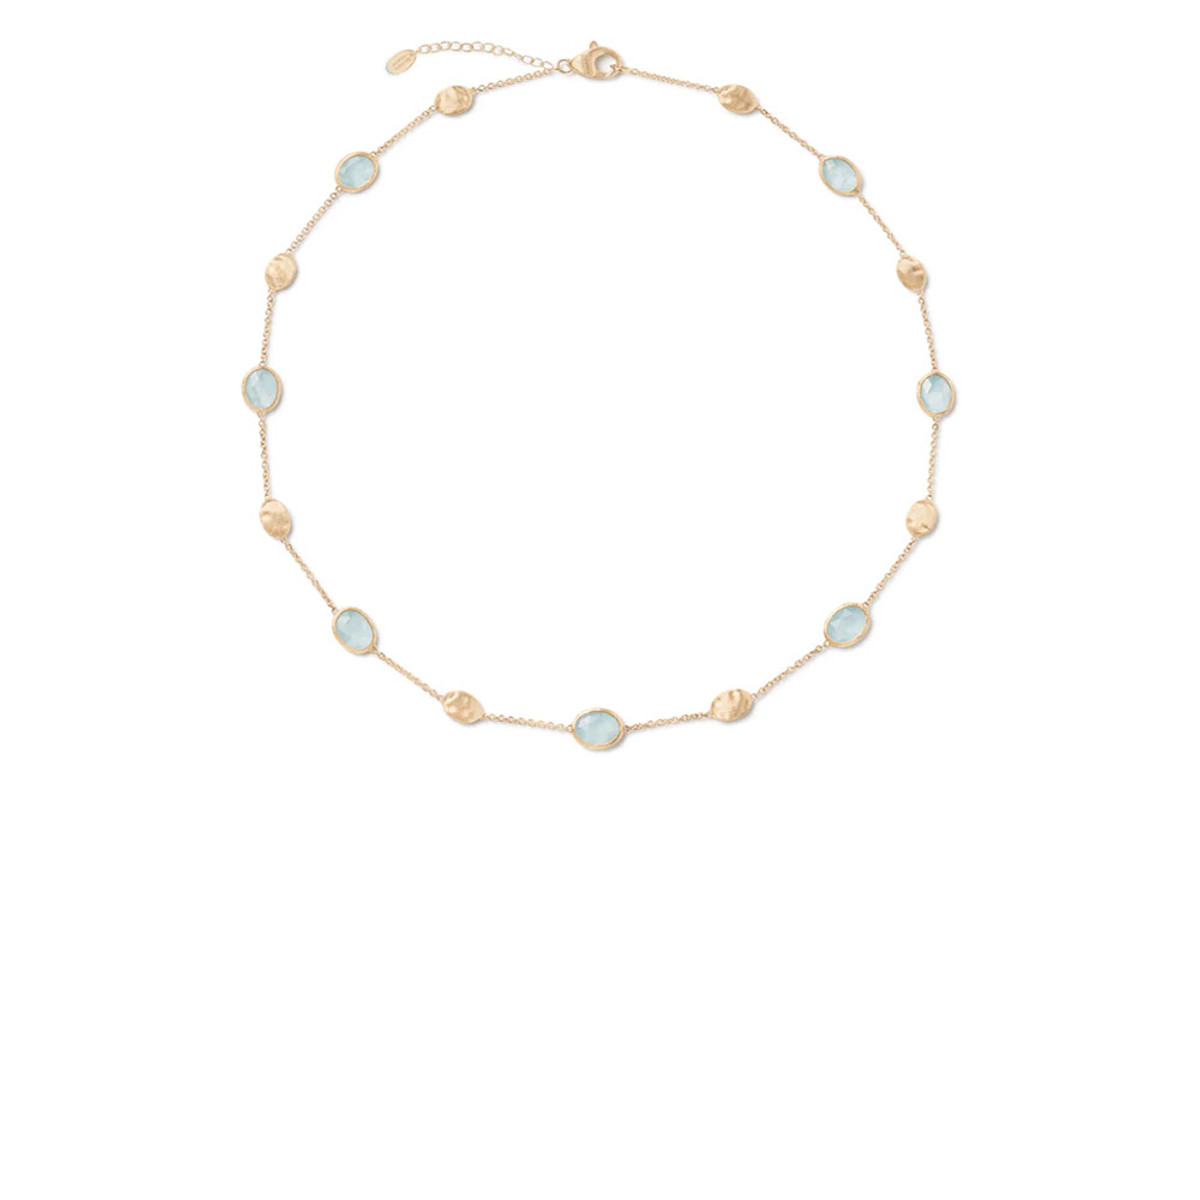 Marco Bicego Siviglia Collection 18K Yellow Gold Aquamarine Necklace with Bead Stations-50556